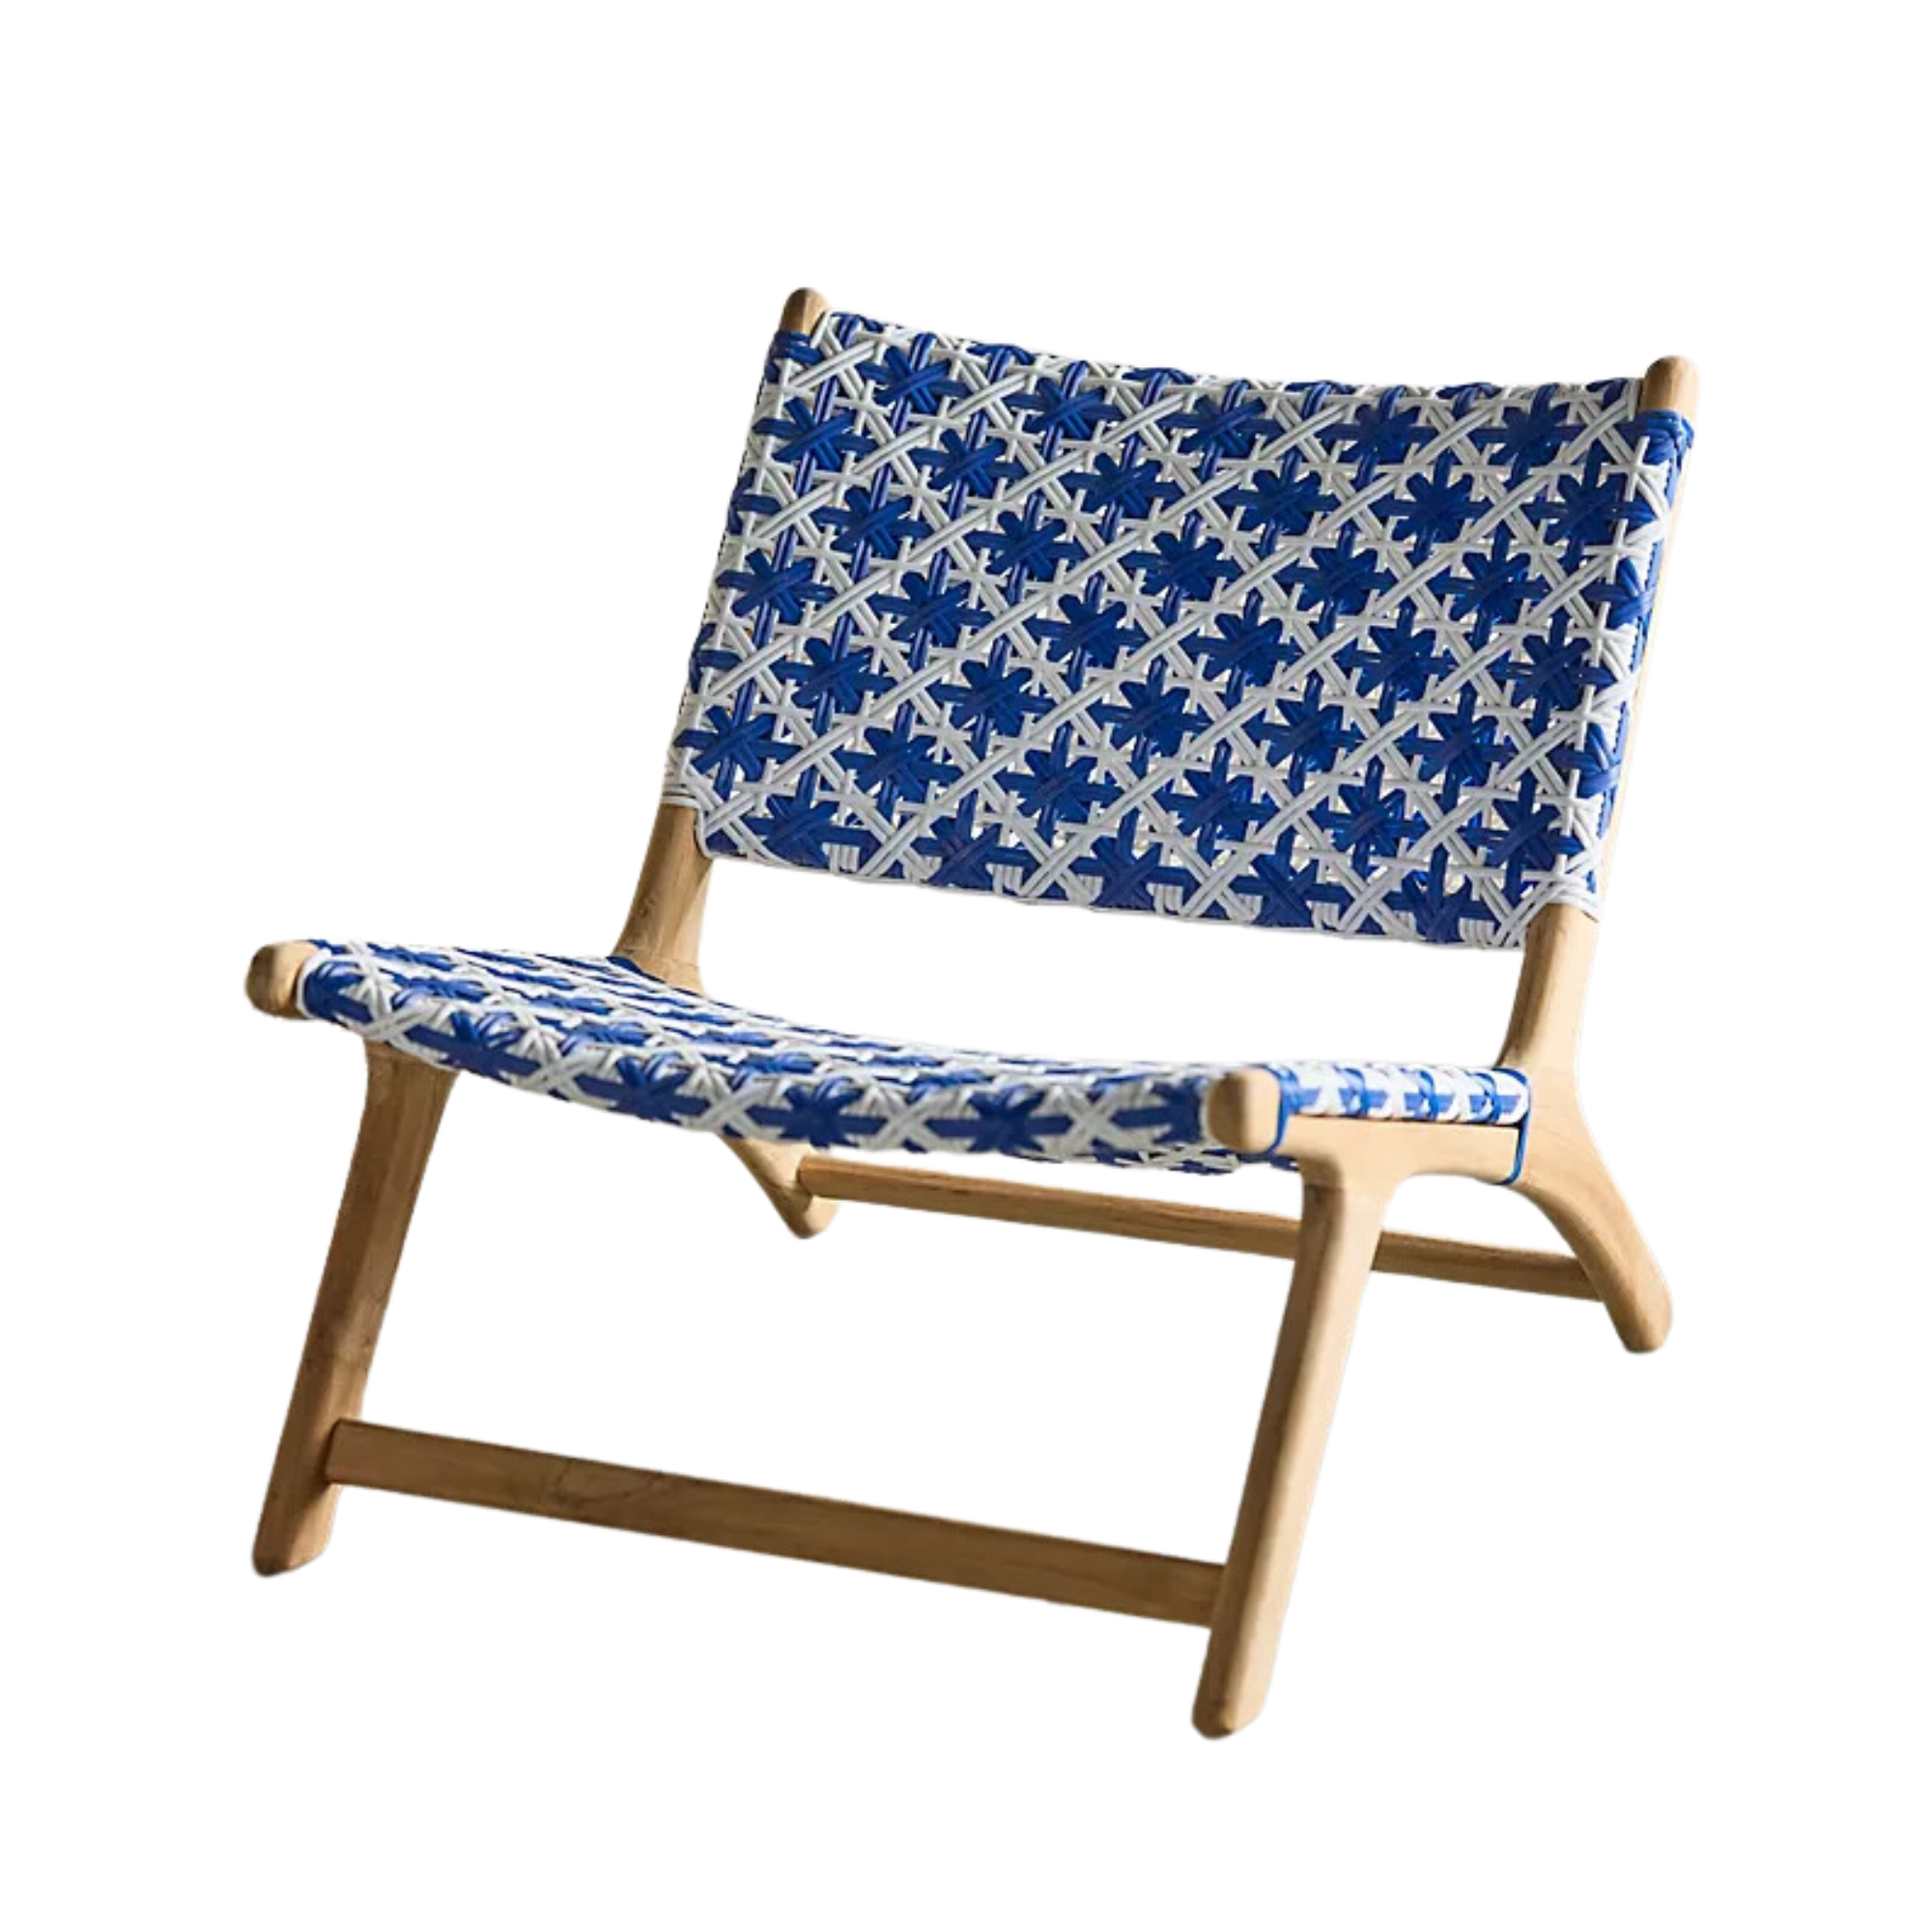 A white and blue outdoor chair